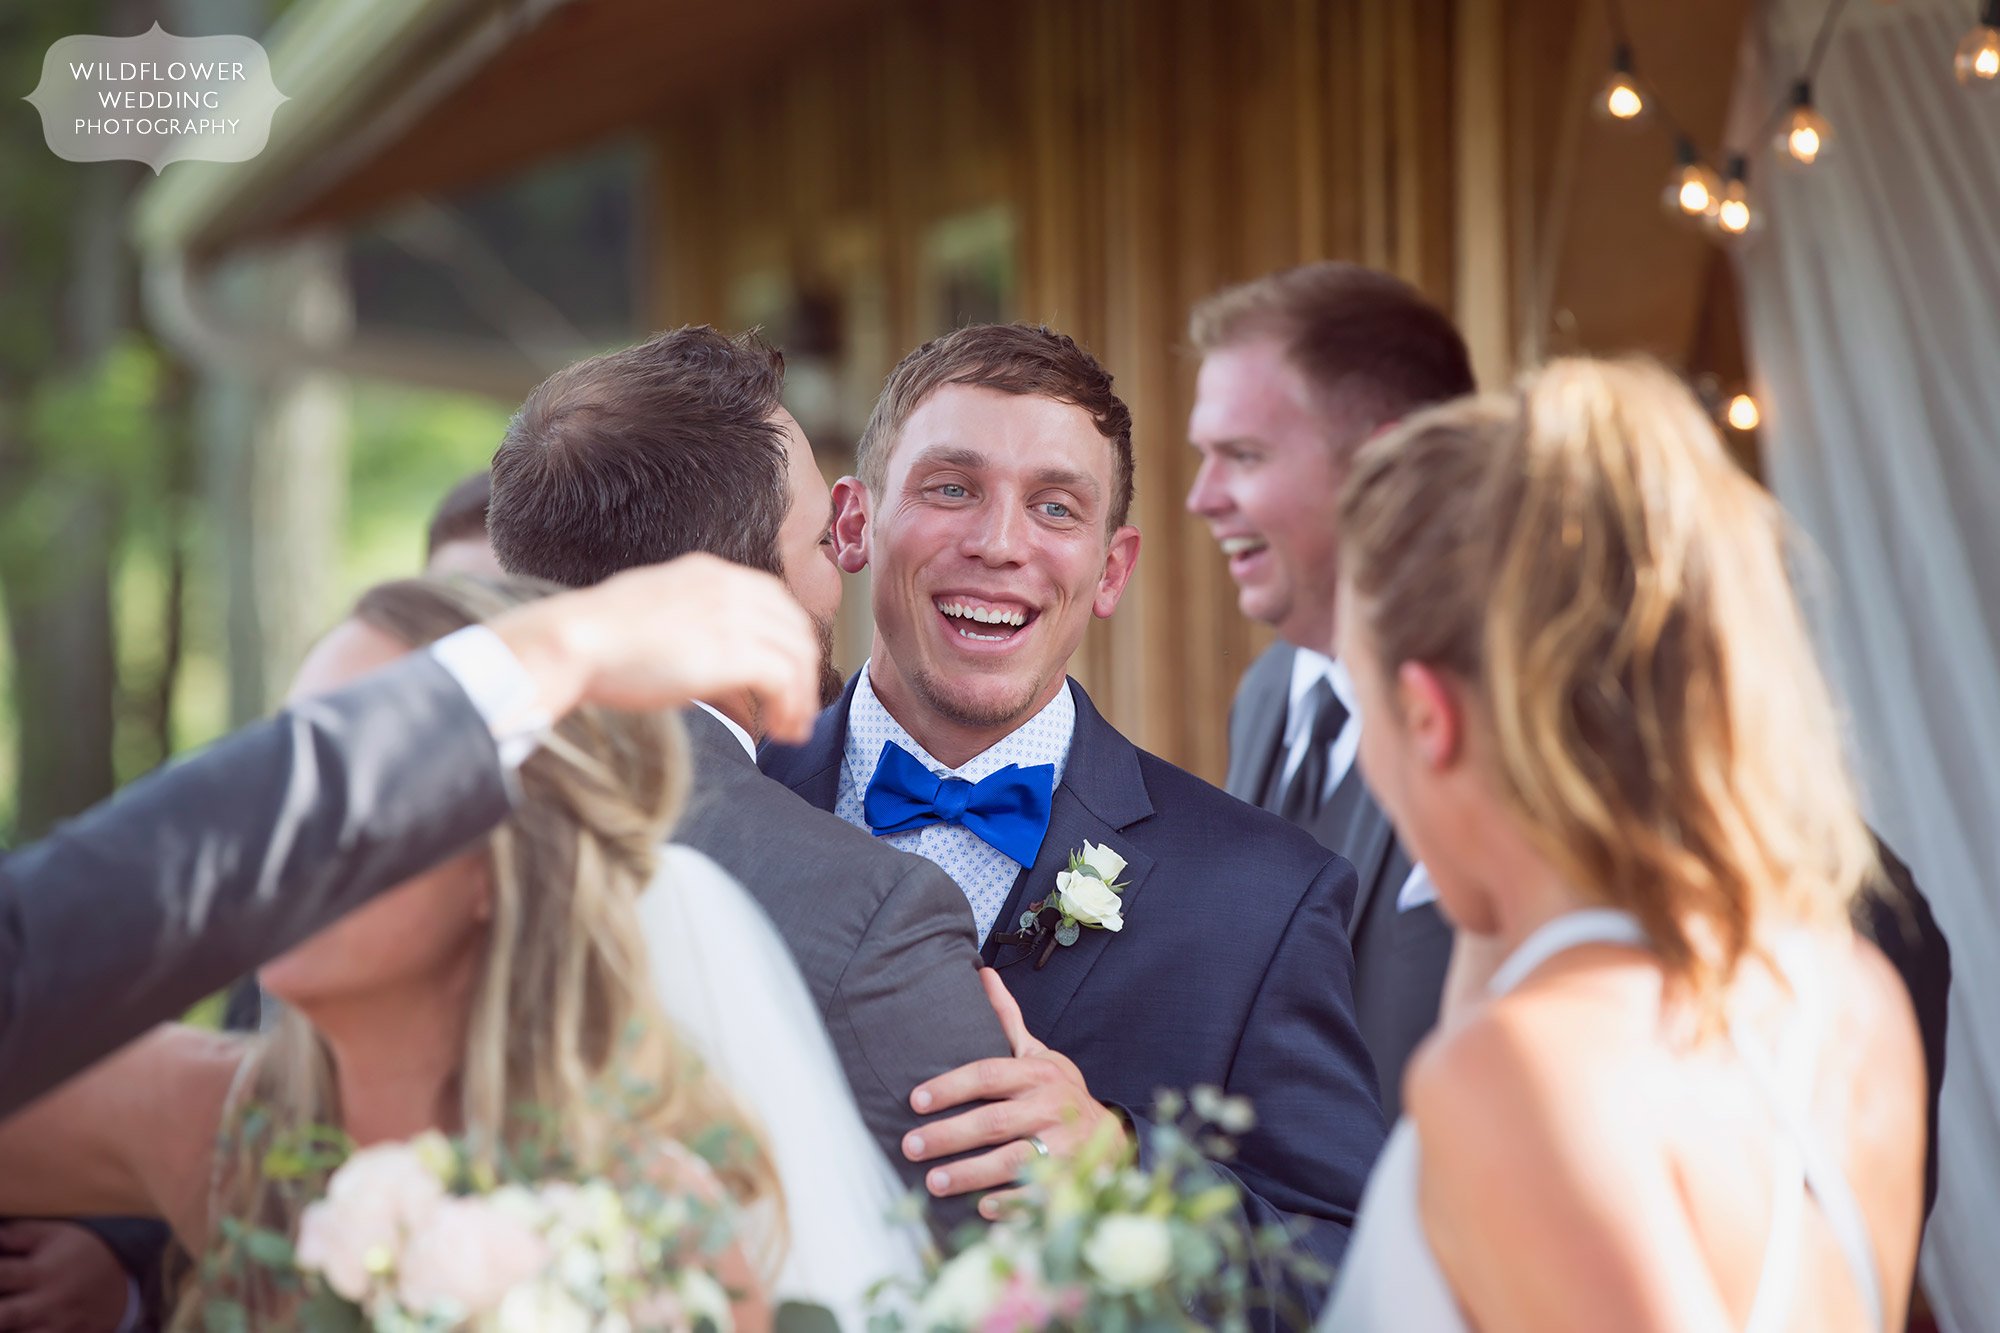 Love this bright and colorful photo of the groom smiling as friends hug him after the barn ceremony in southern MO.